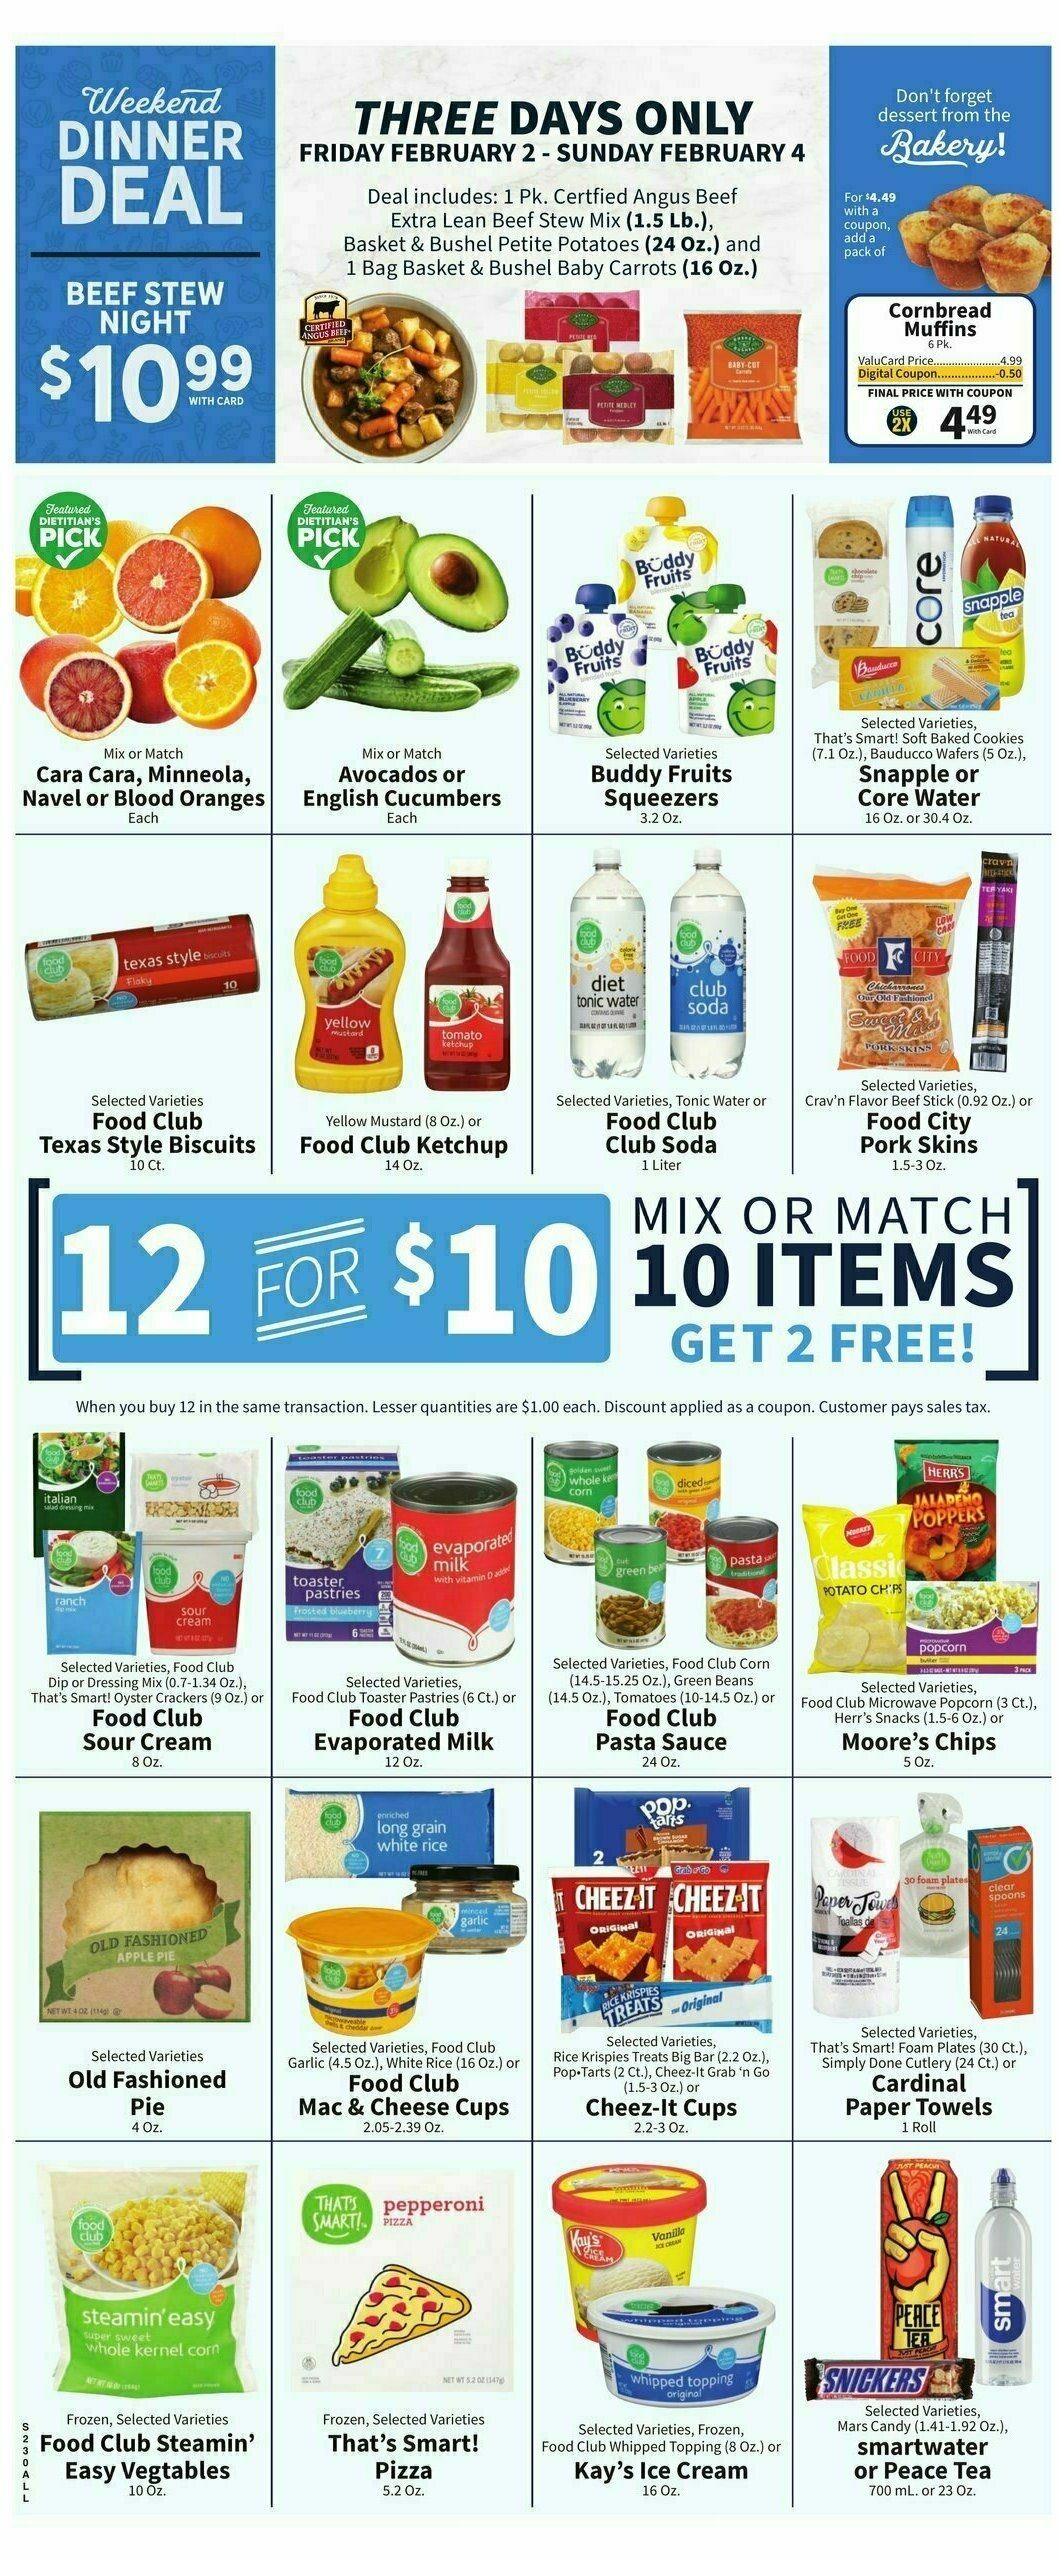 Food City Weekly Ad from January 31